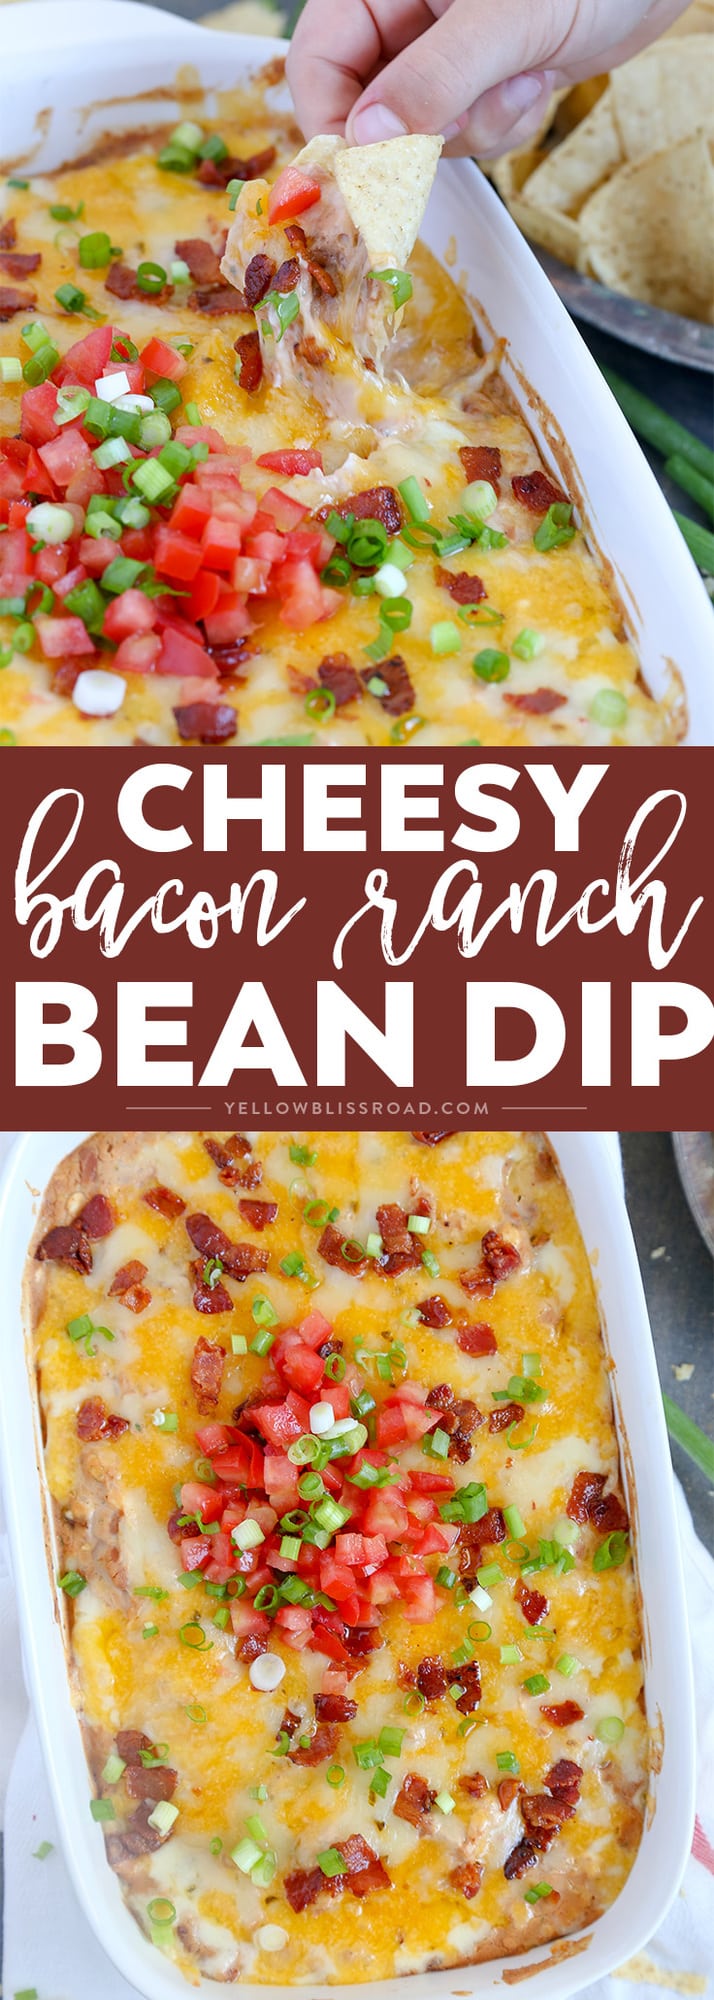 Creamy and intensely flavorful, this Cheddar Bacon Ranch Bean Dip is highly addictive and sure to be your new favorite appetizer and a hit at your next party.